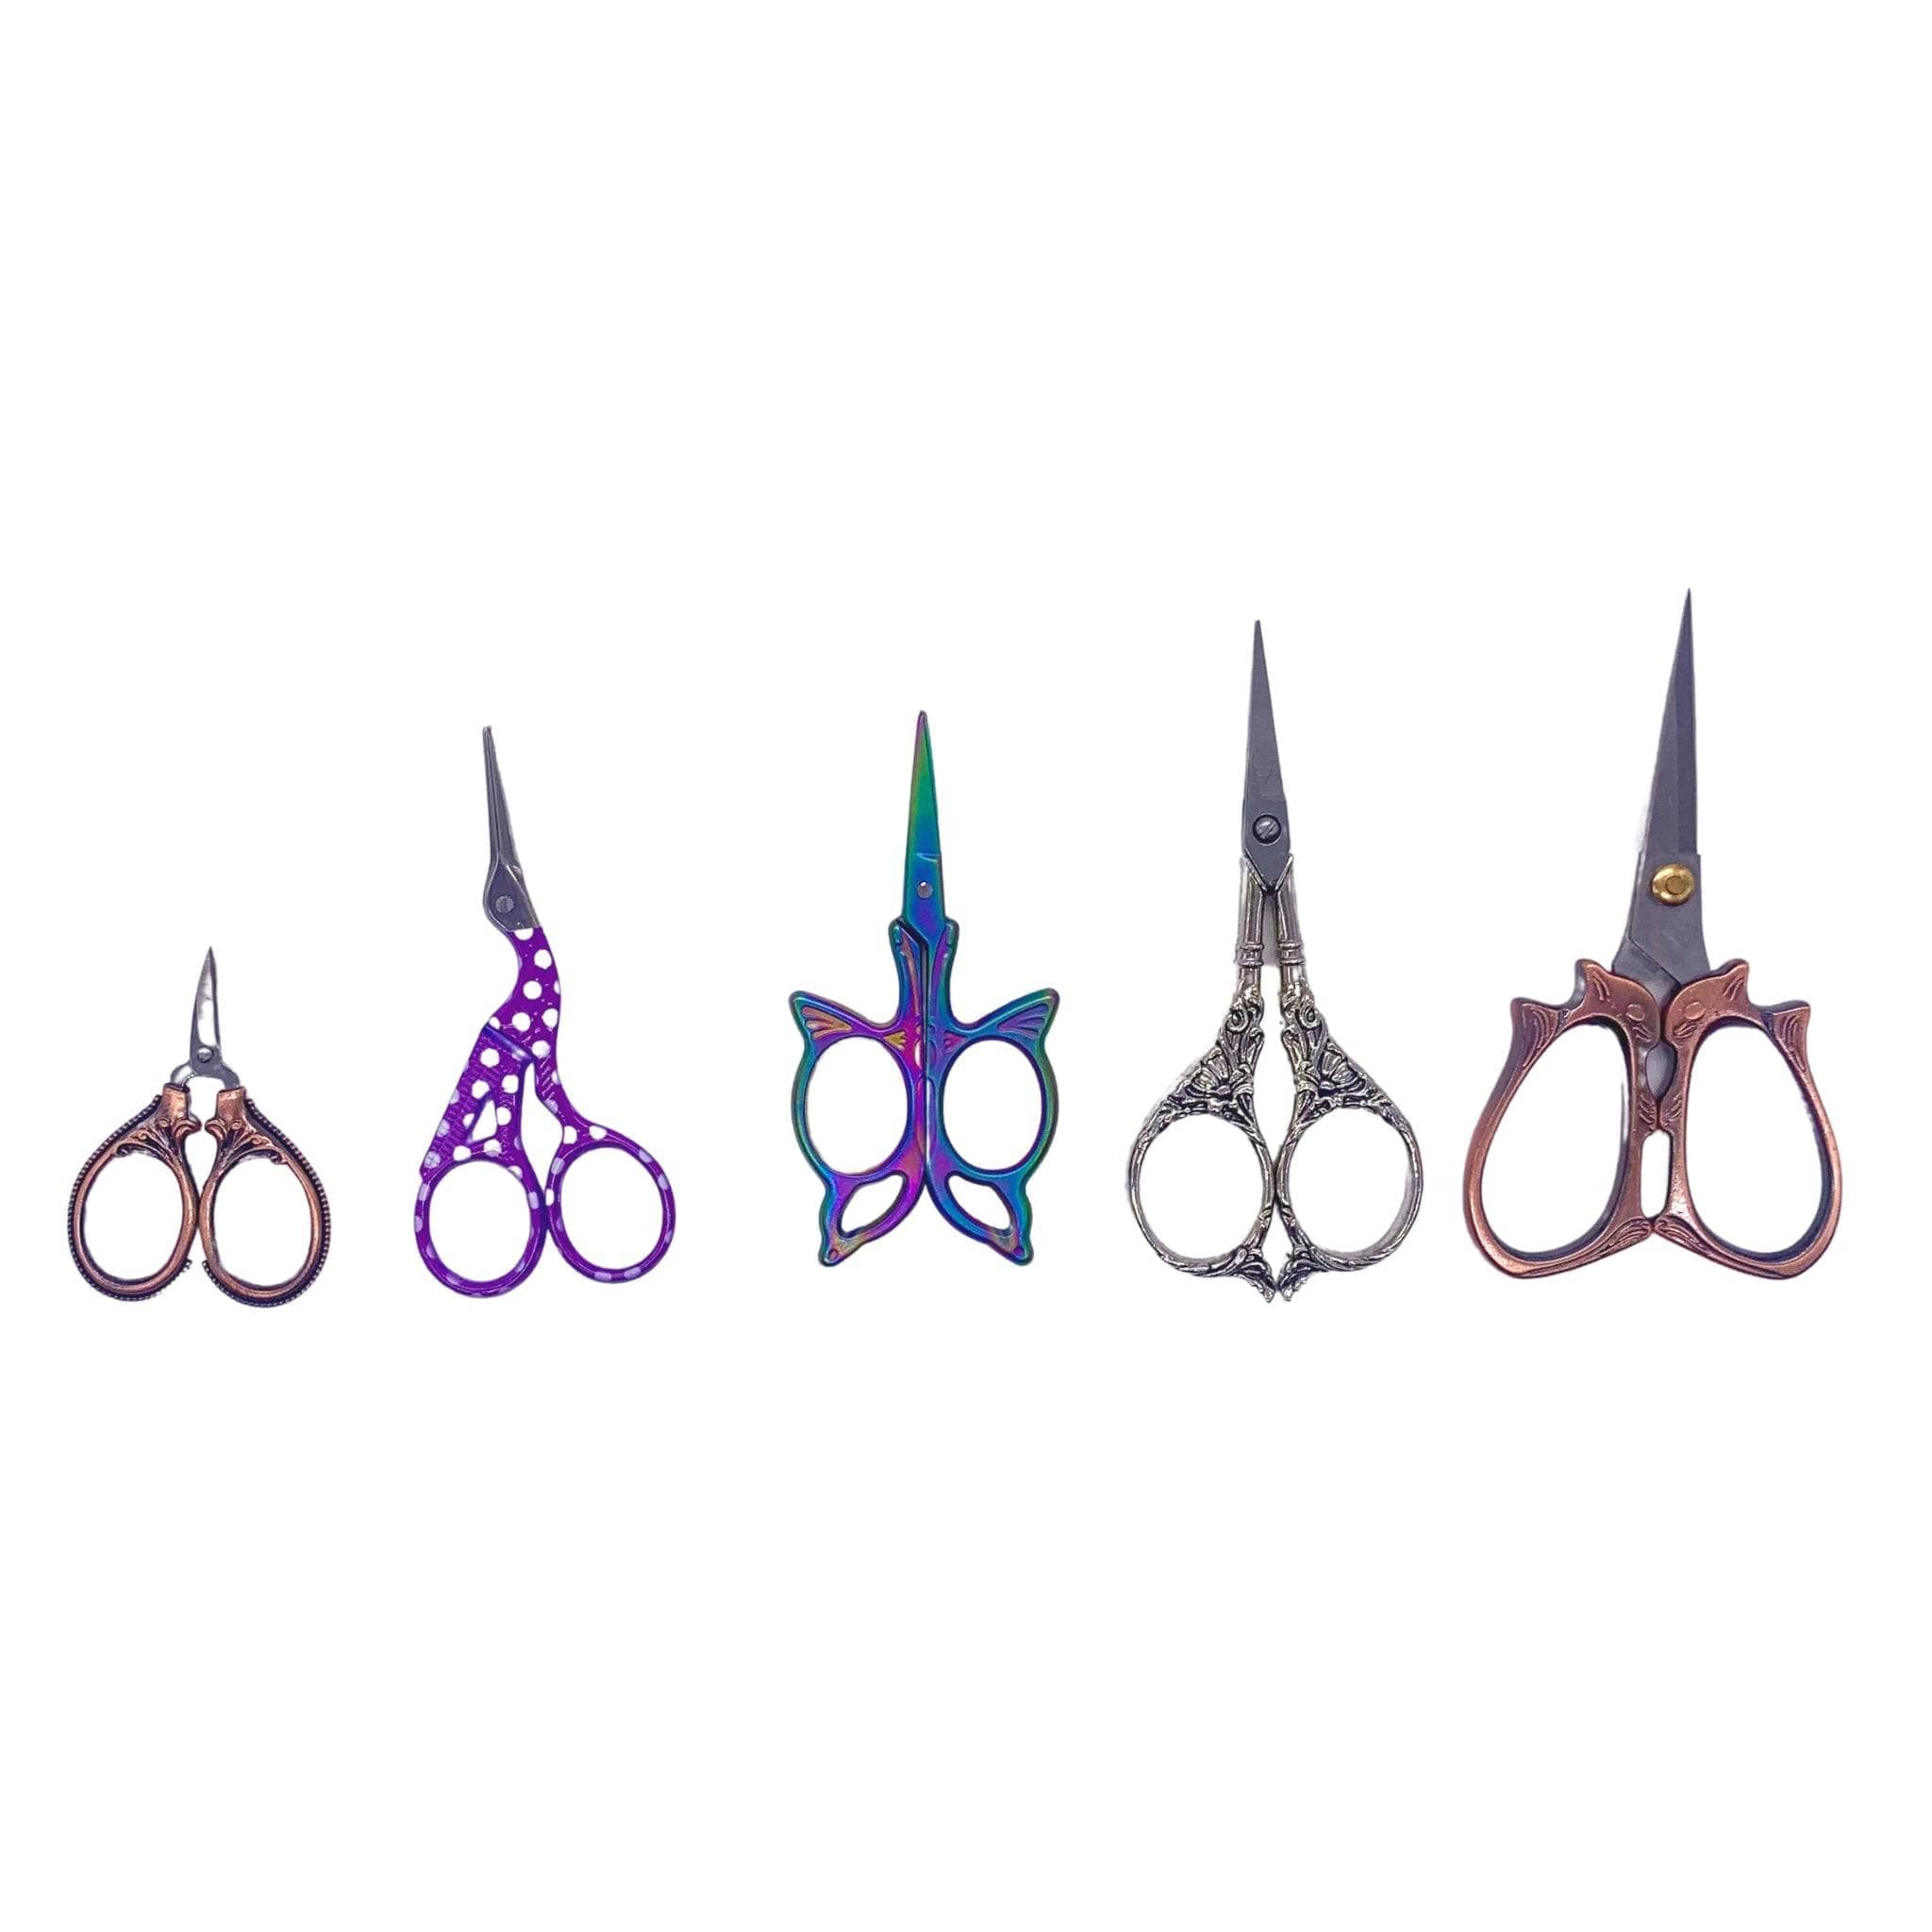 Knitting Scissors, Strong And Firm Crafting Scissors For Embroidery 